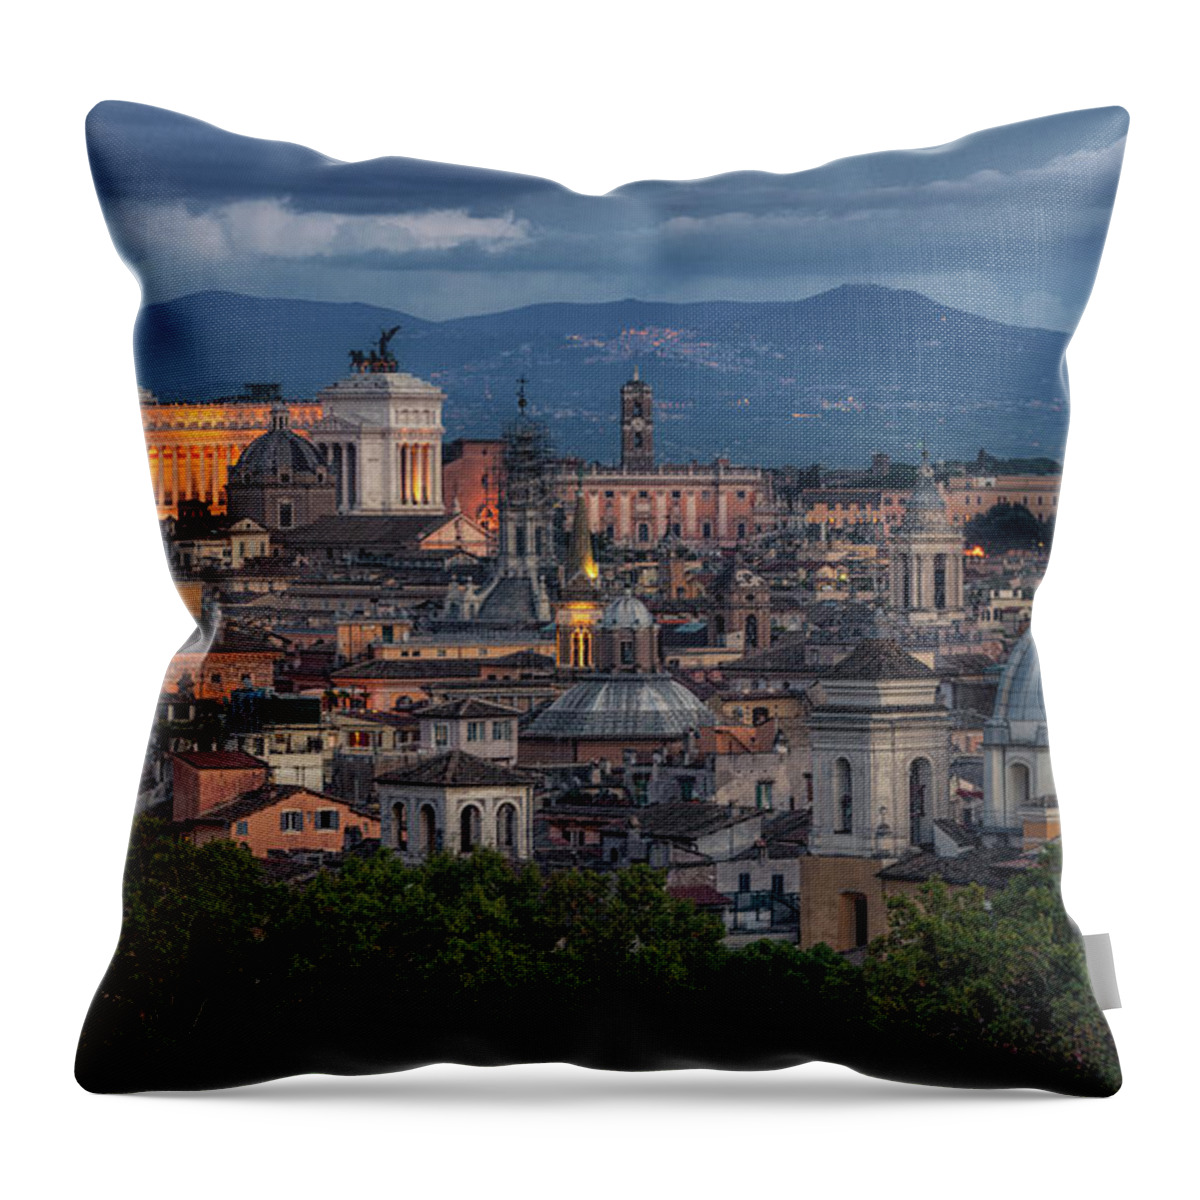 Il Vittoriano Throw Pillow featuring the photograph Rome Twilight by James Billings